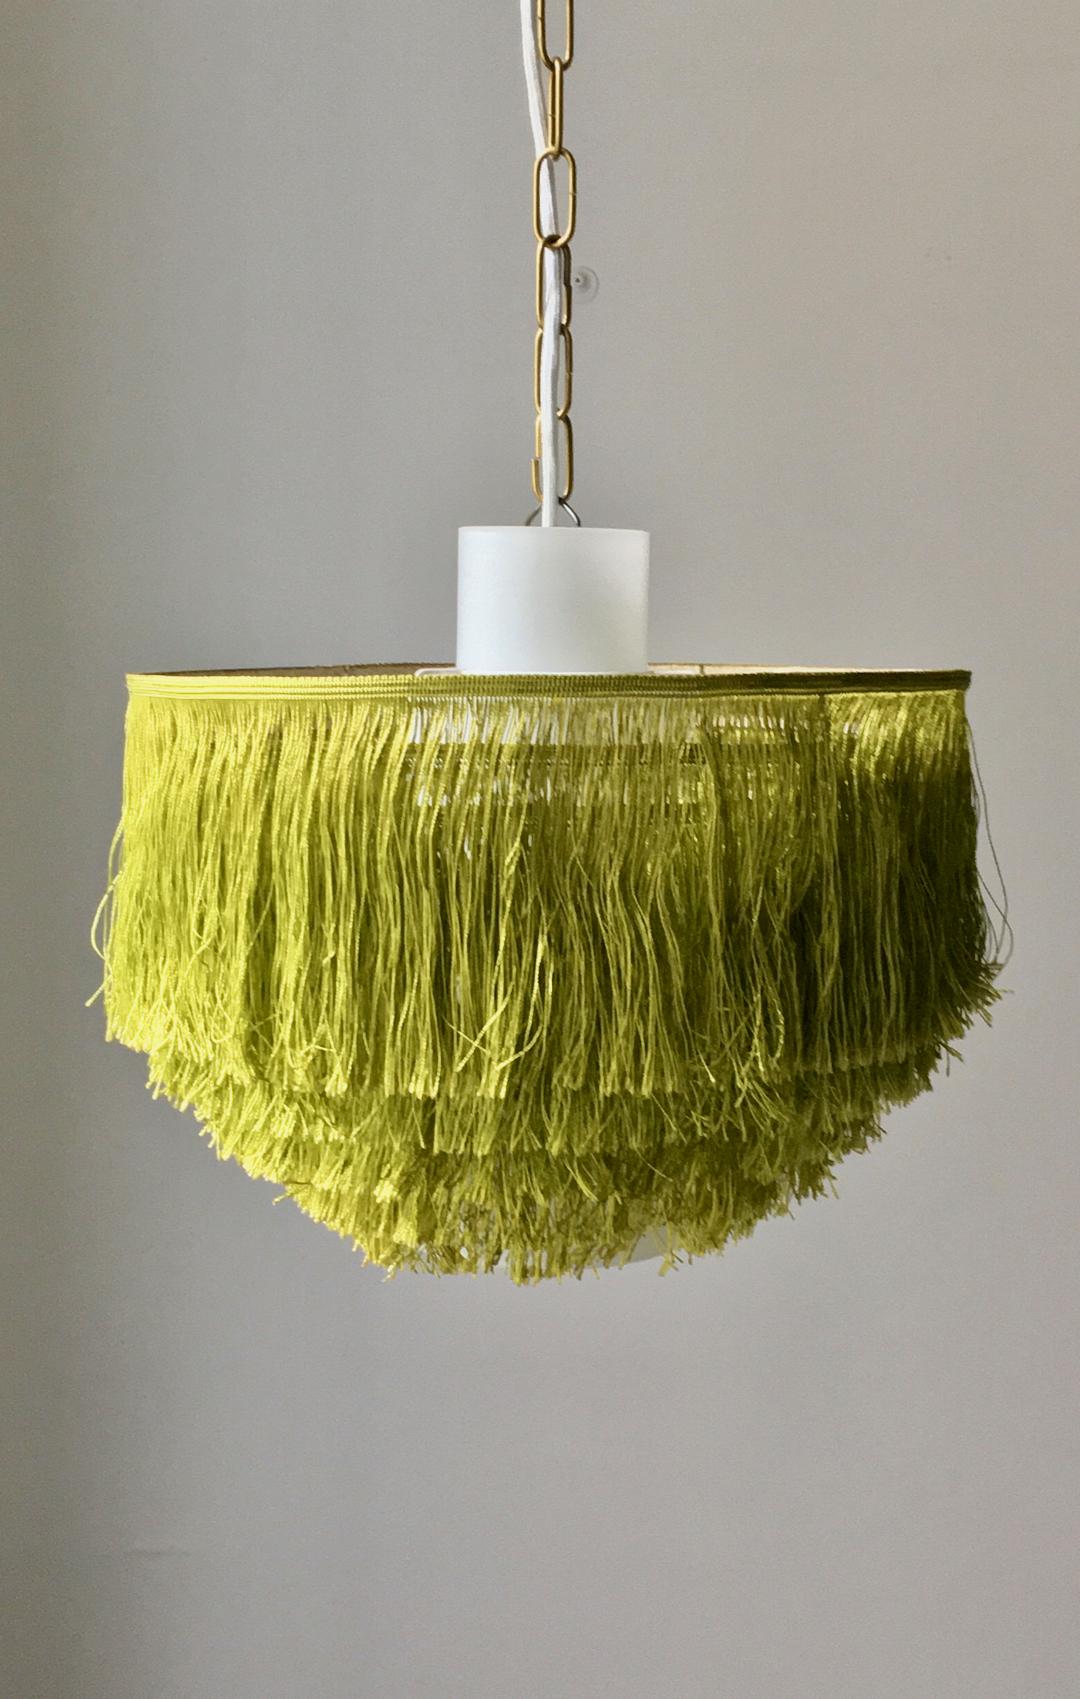 Green silk fringe light with glass liner by Hans-Agne Jakobsson, made by his company in Markaryd, Sweden. Two lights available, price is per piece.

The fixtures can be hung near the ceiling (using the loop visible in image 4) or as a pendant by